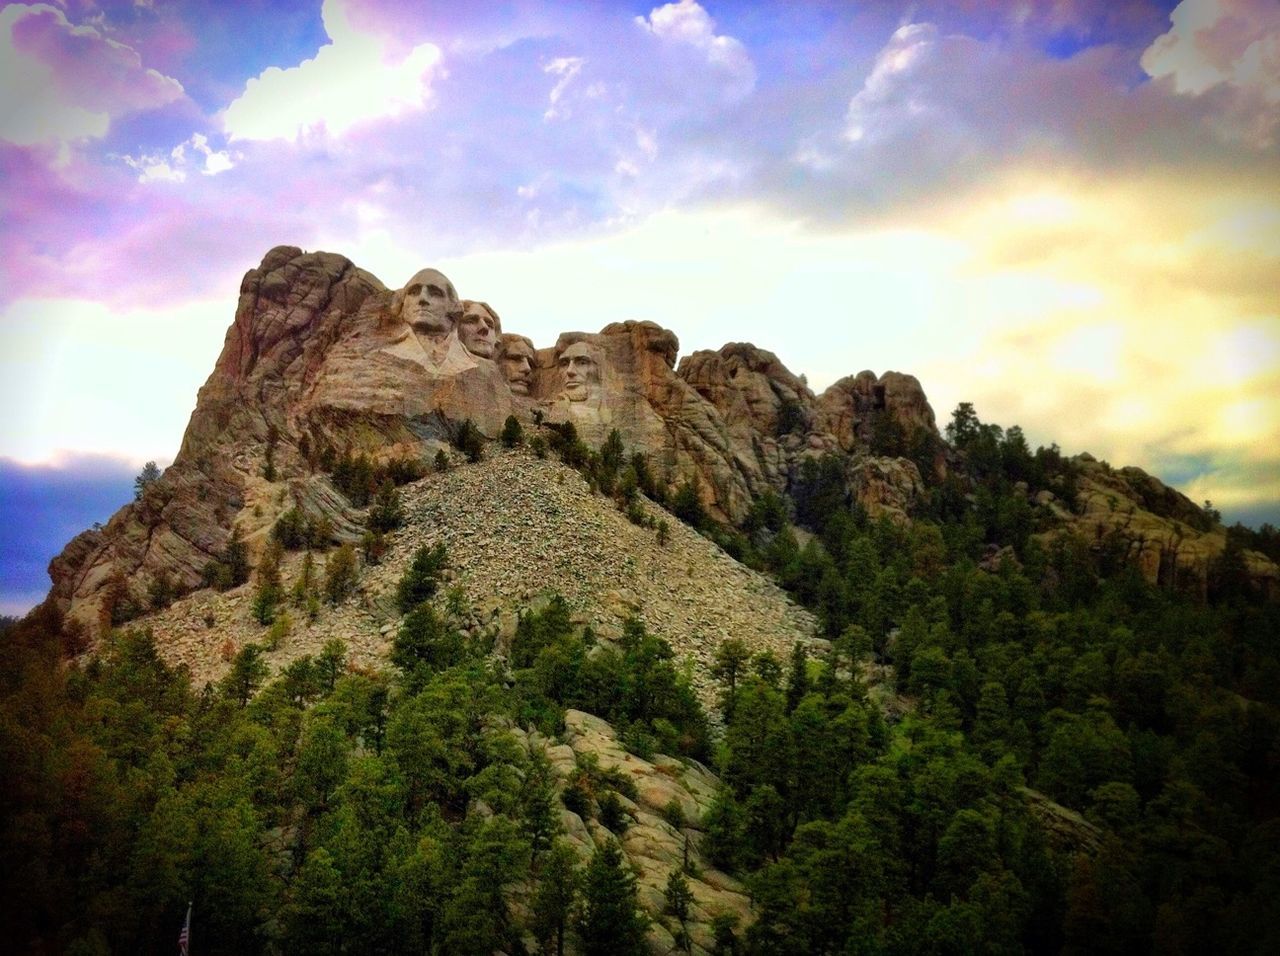 Low angle view of mount rushmore against clouds